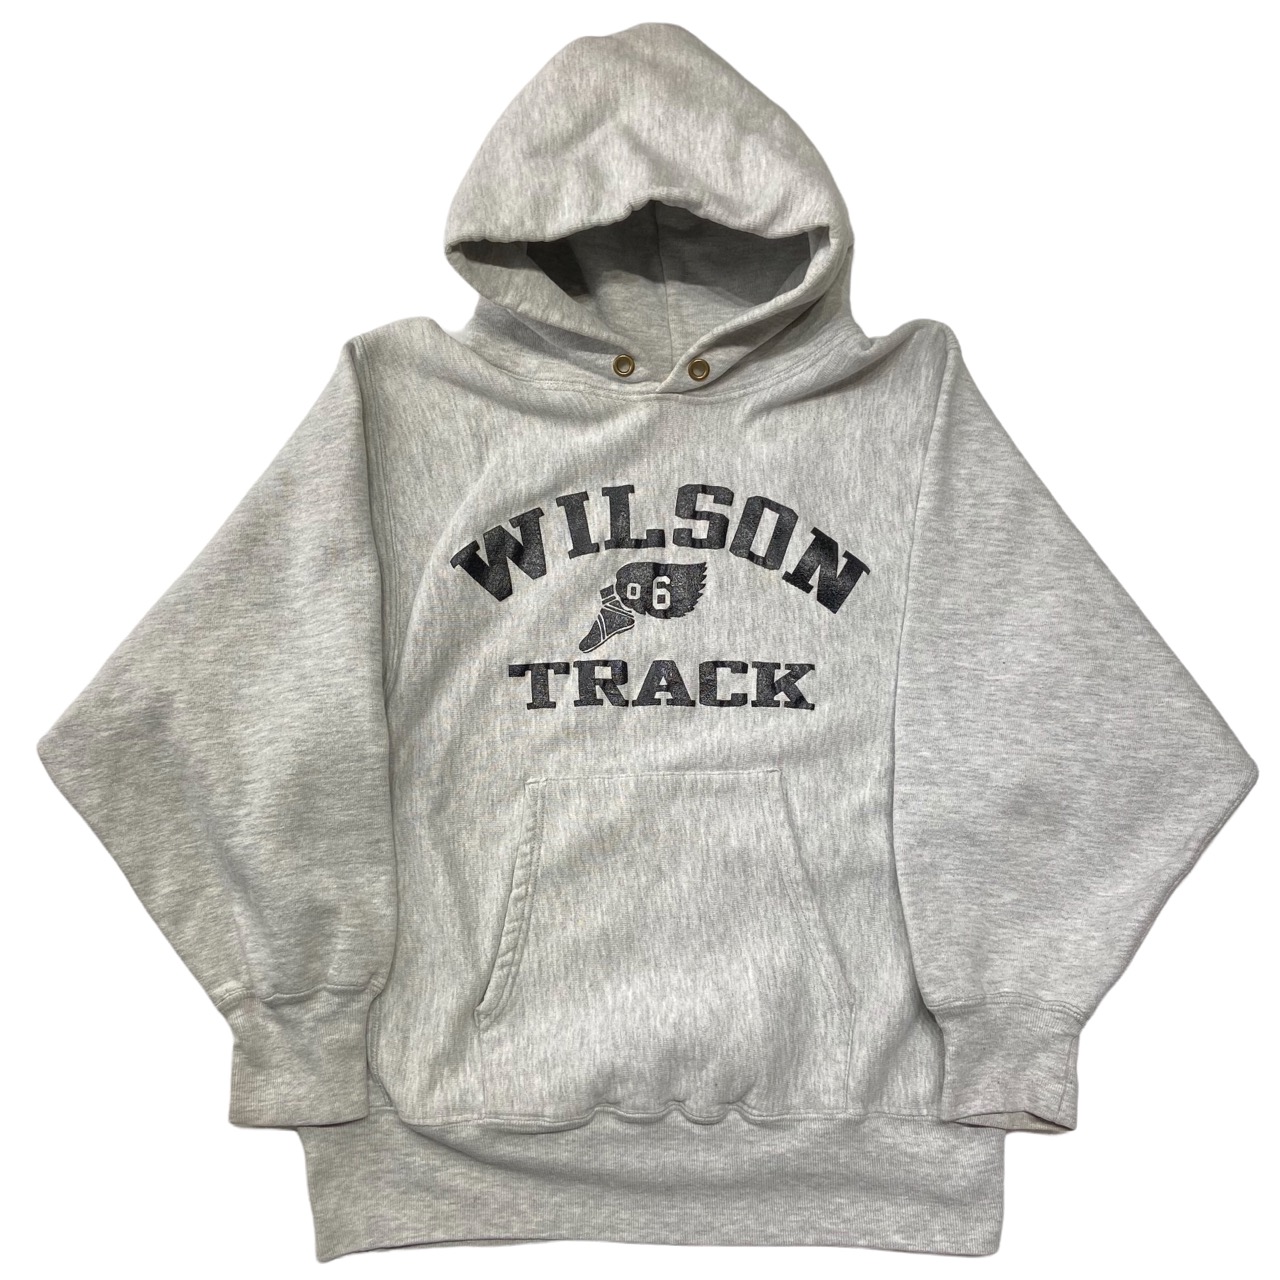 80s Champion Reverse Weave Hoodie Wing Foot “WILSON TRACK” Made in 